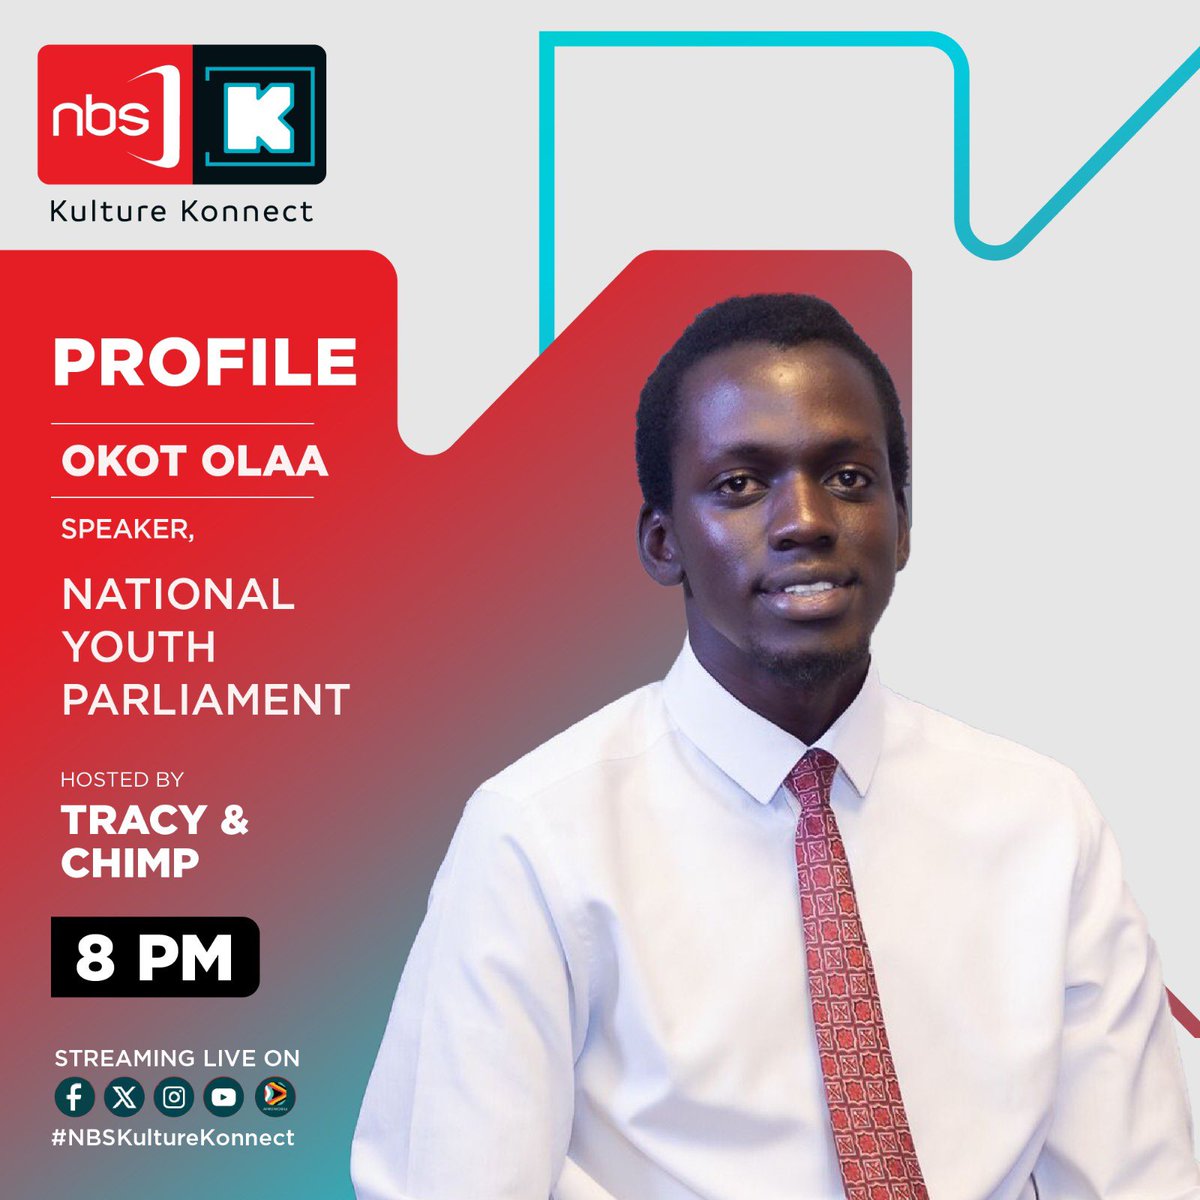 Tonight on #NBSKultureKonnect we’ll be profiling Okot Olaa, Speaker at the National Youth Parliament. 

Catch the episode tonight at 8pm on AfroMobile and subscribe to our YouTube channel youtube.com/@nextkulture?s…

#NextKulture #OnFormToInform